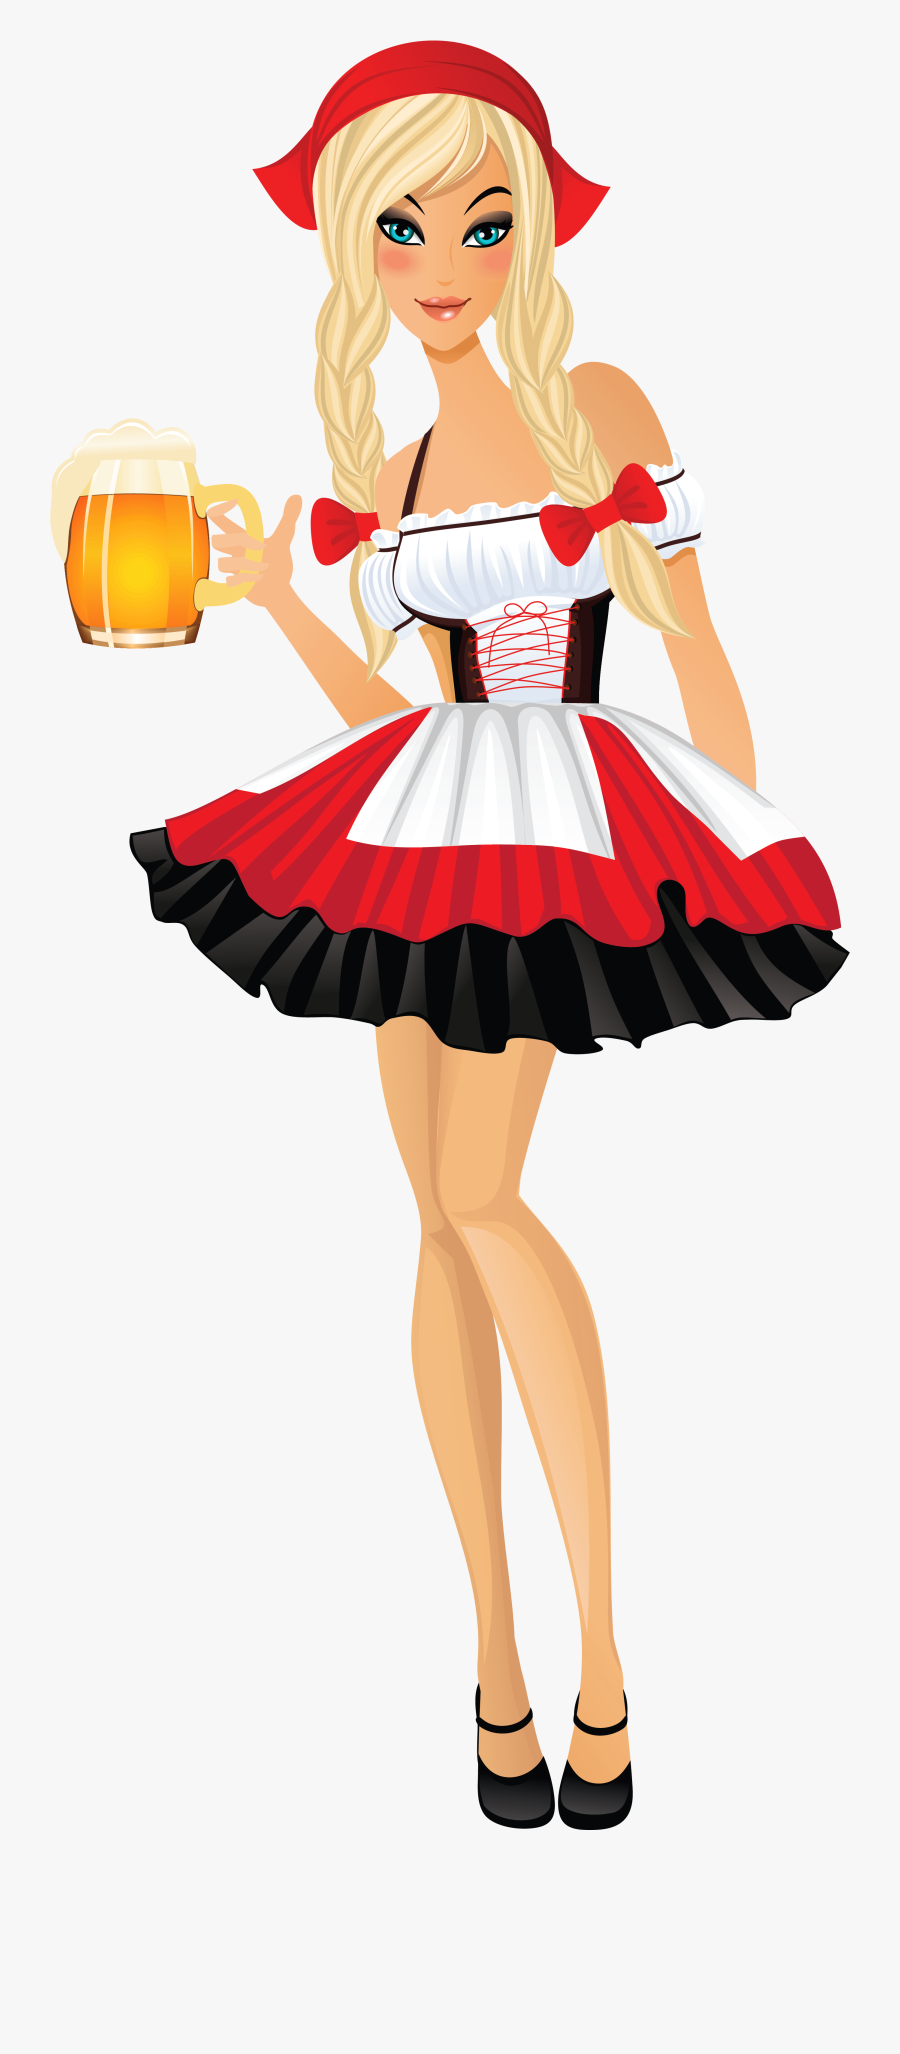 Oktoberfest Girl With Beer Mugs Png Clipart Image, Transparent Clipart